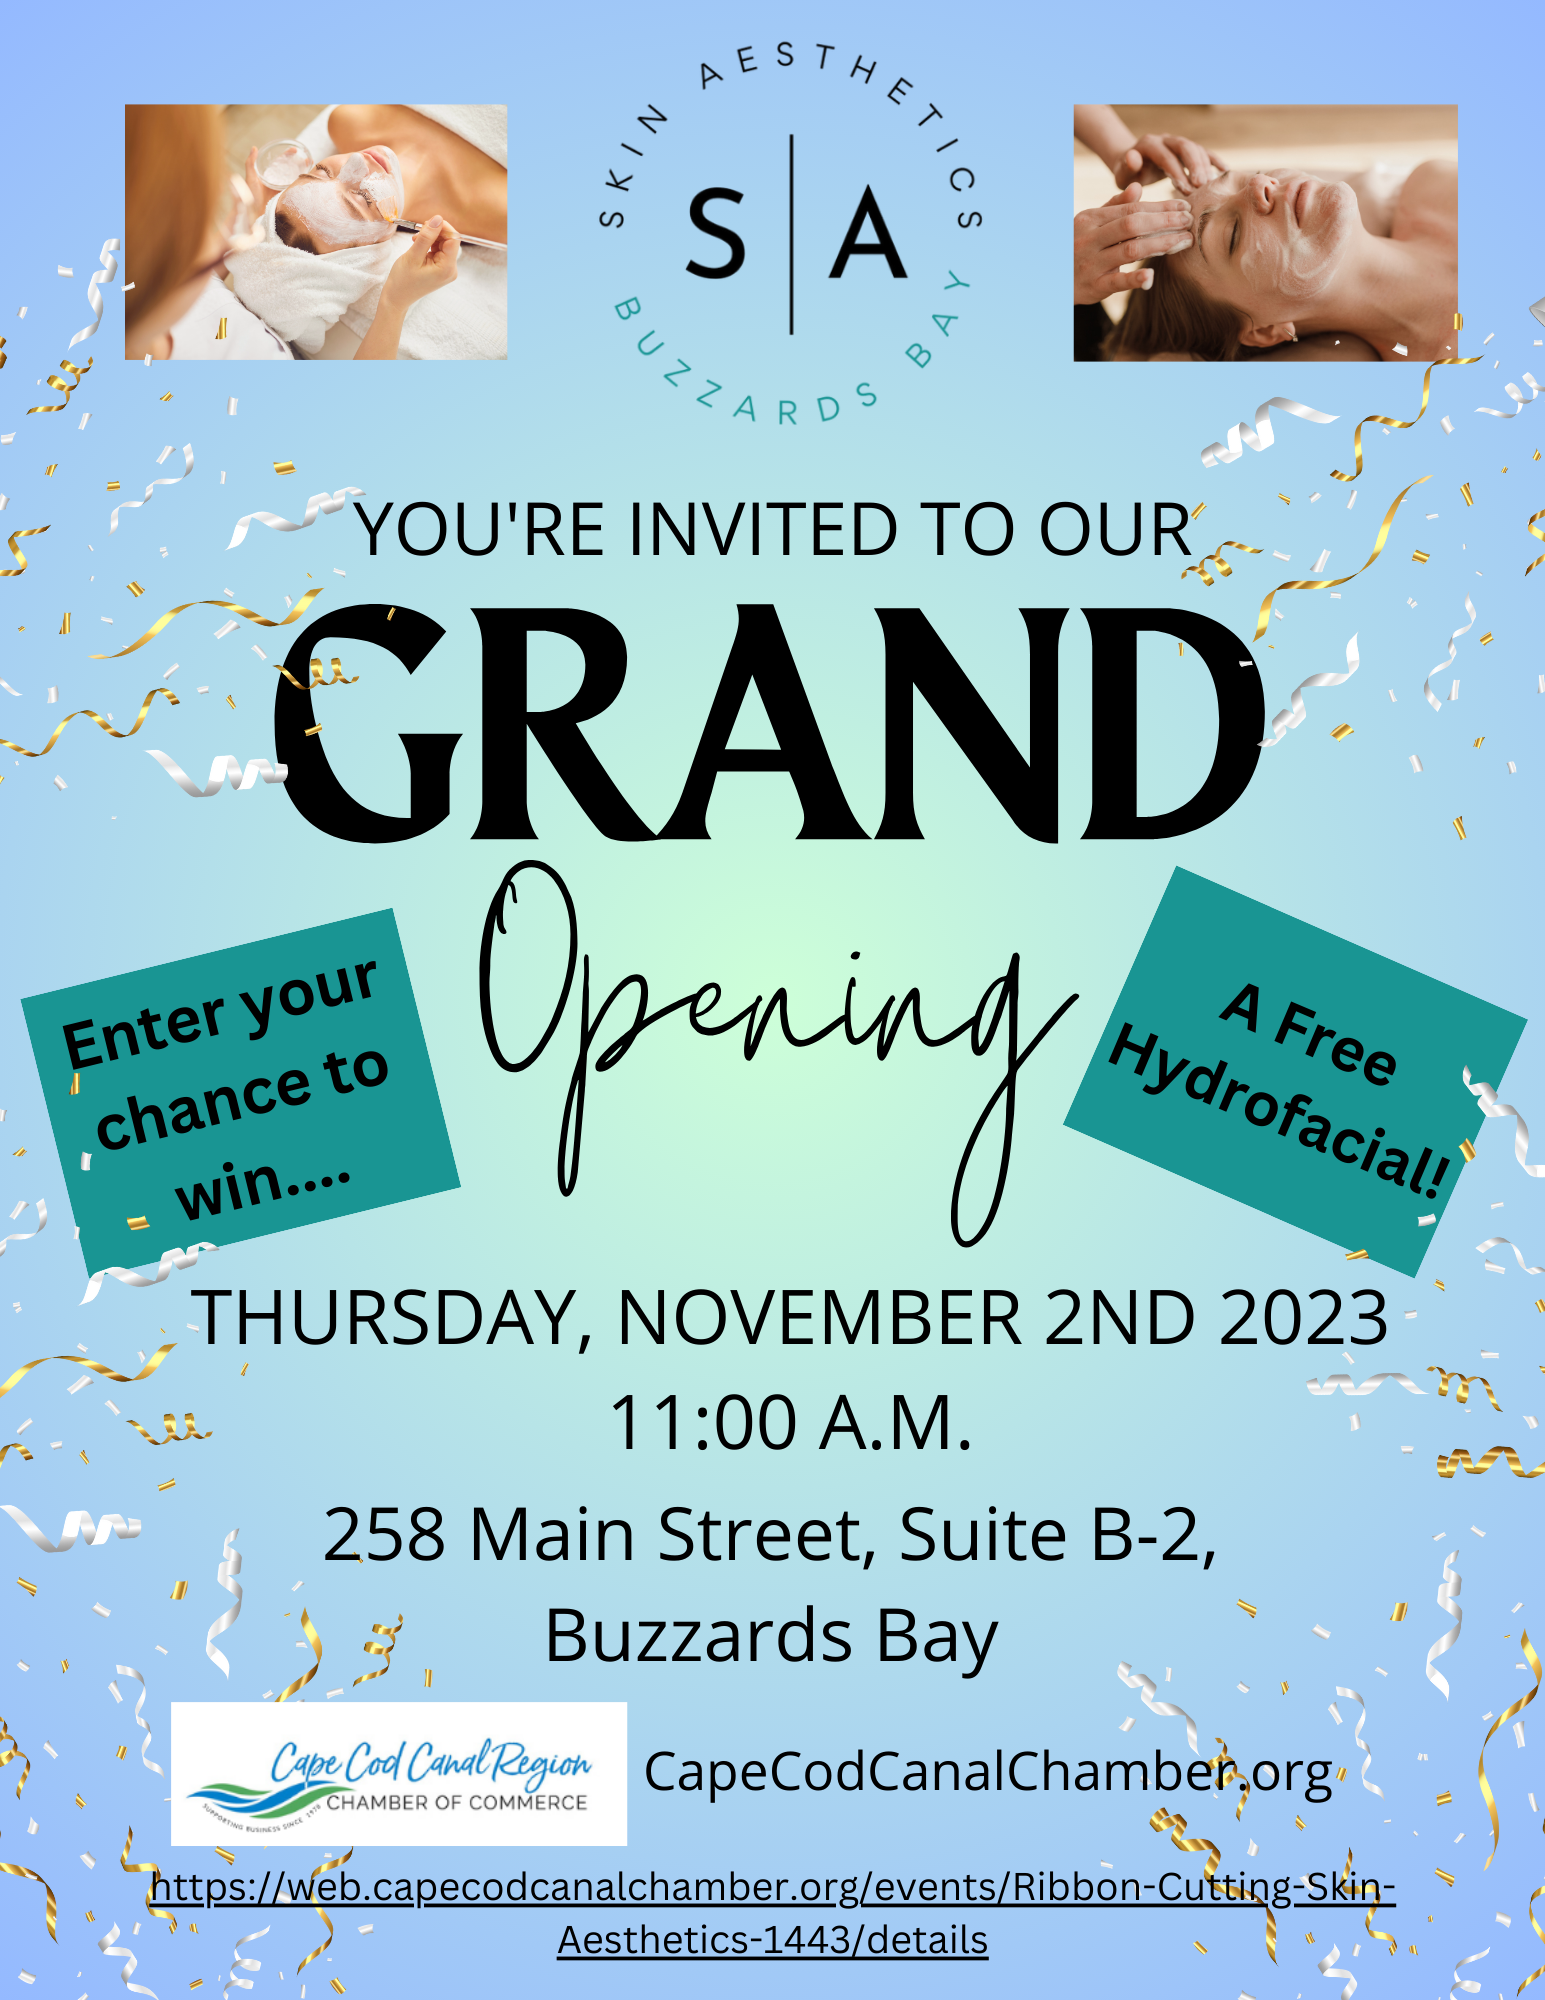 Grand Opening of Skin Aesthetics! Cape Cod Canal Region Chamber of